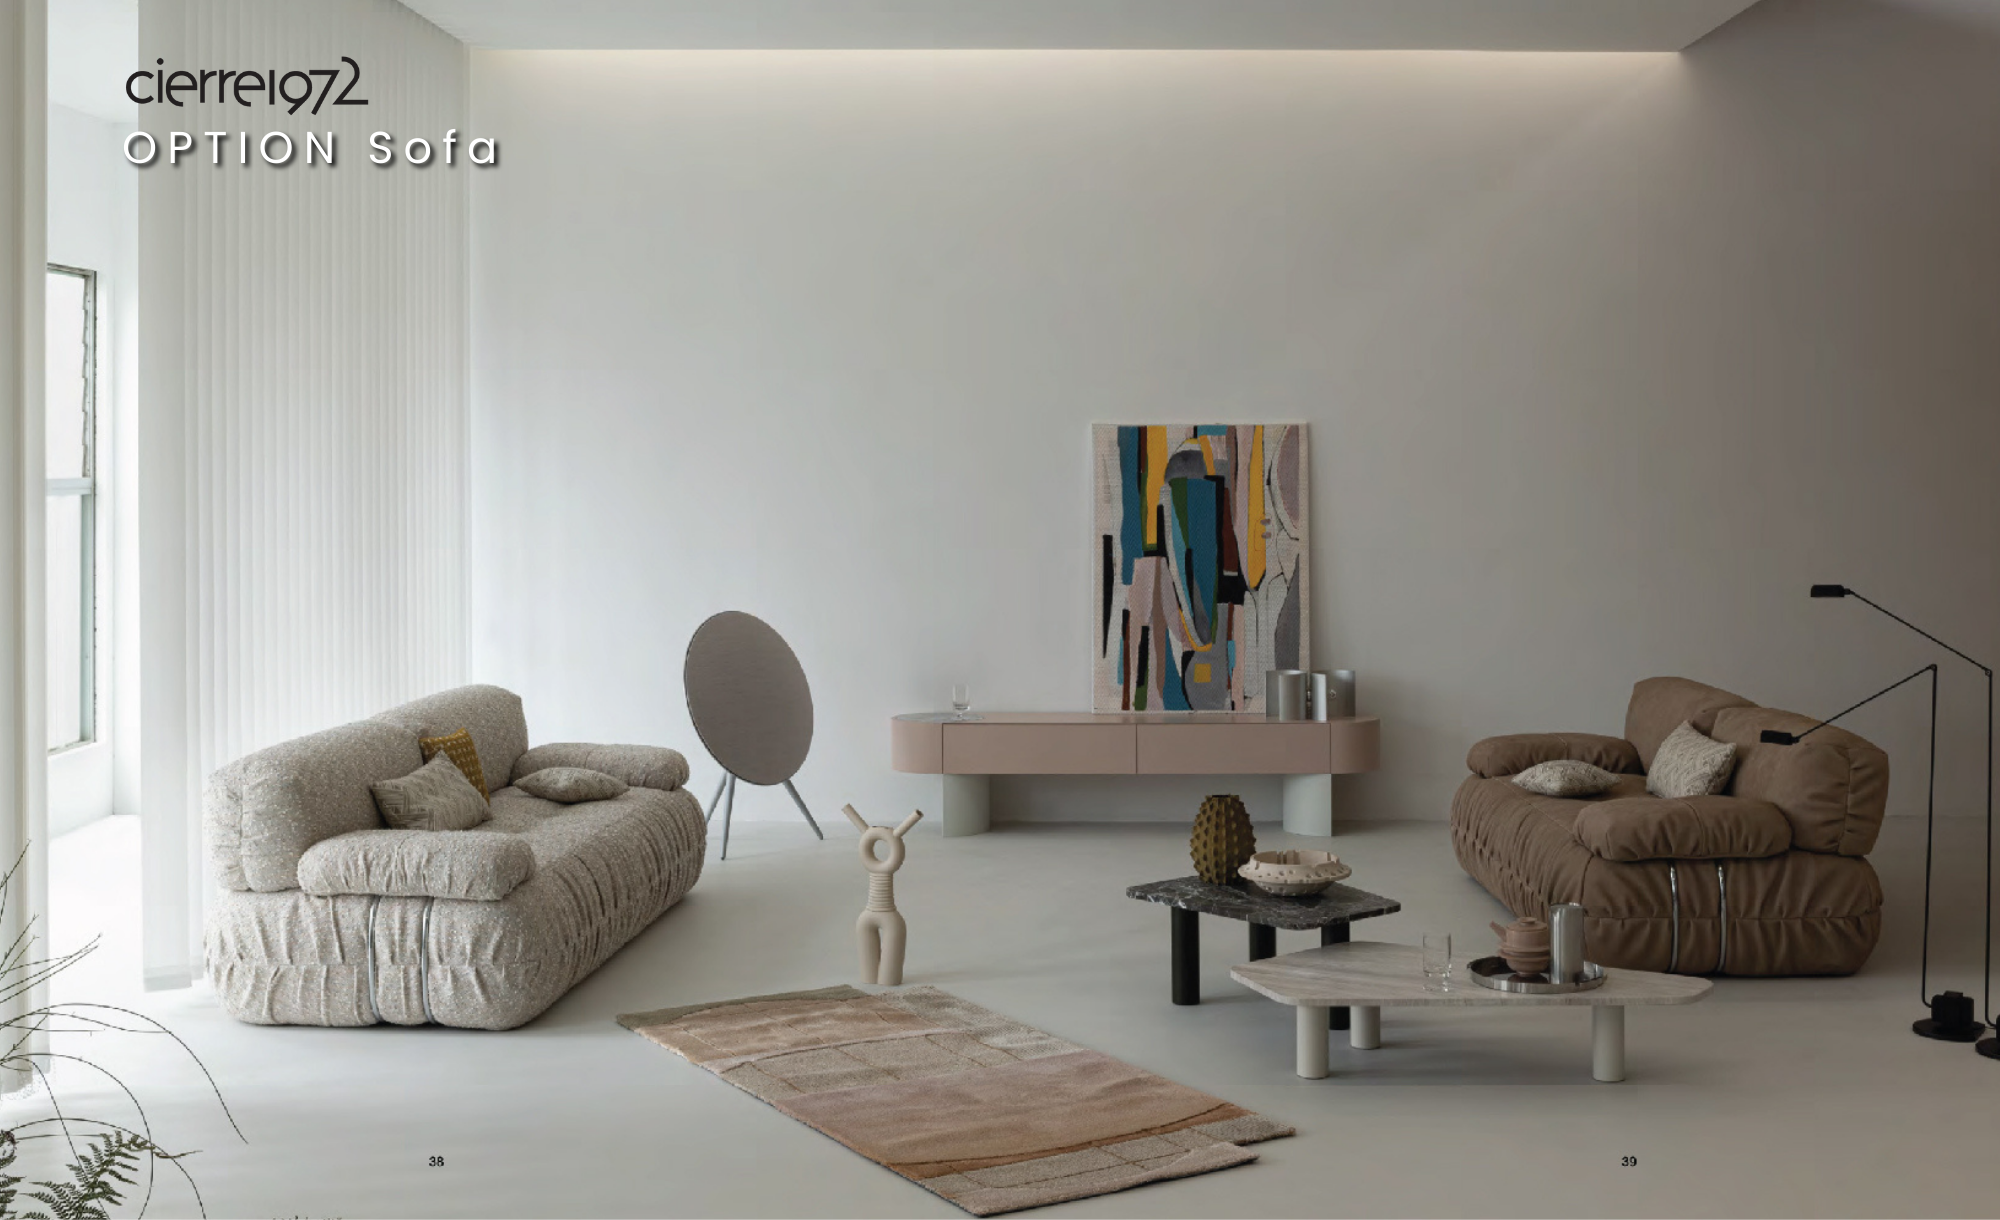 Experience Marquis European Imported Modern Contemporary Collection by Cierre, Gallotti&Radice, Porada & Meridiani